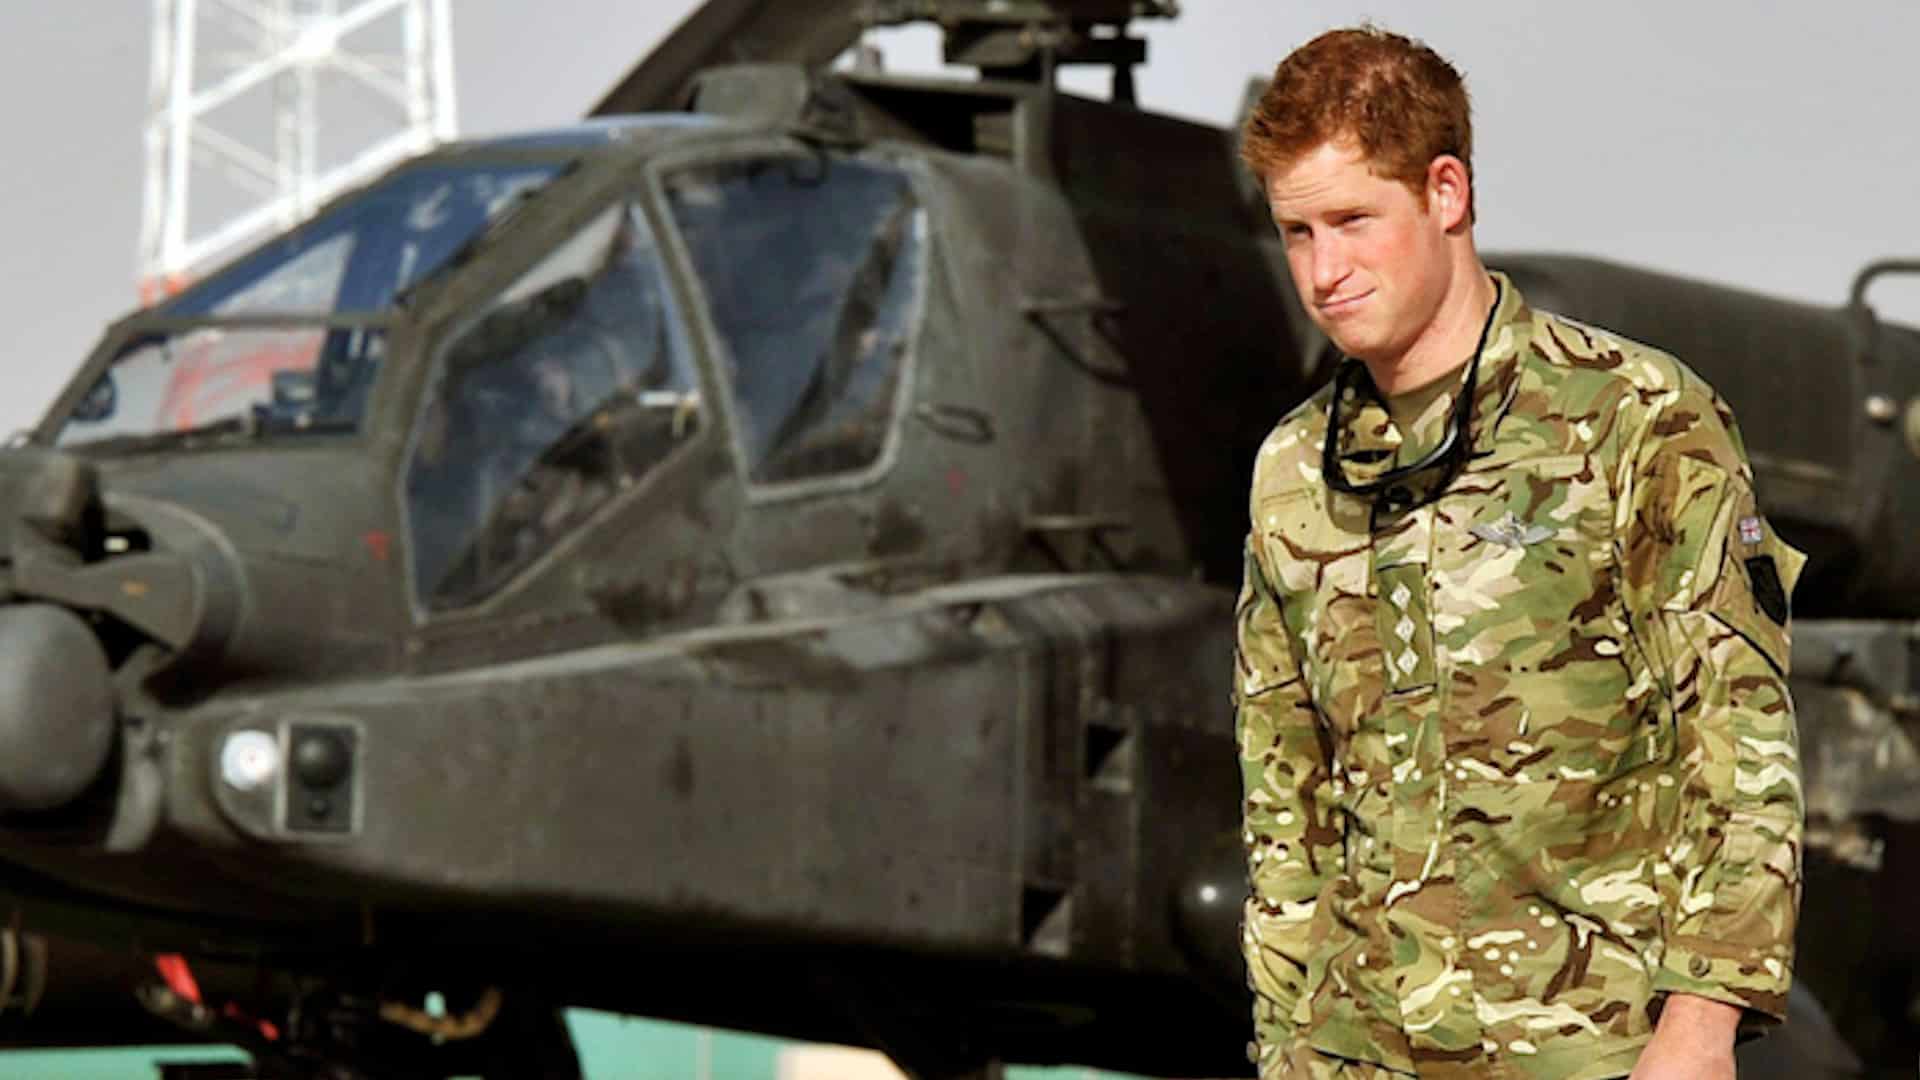 Prince Harry Slammed for Bragging About Killing 25 Taliban Muslims